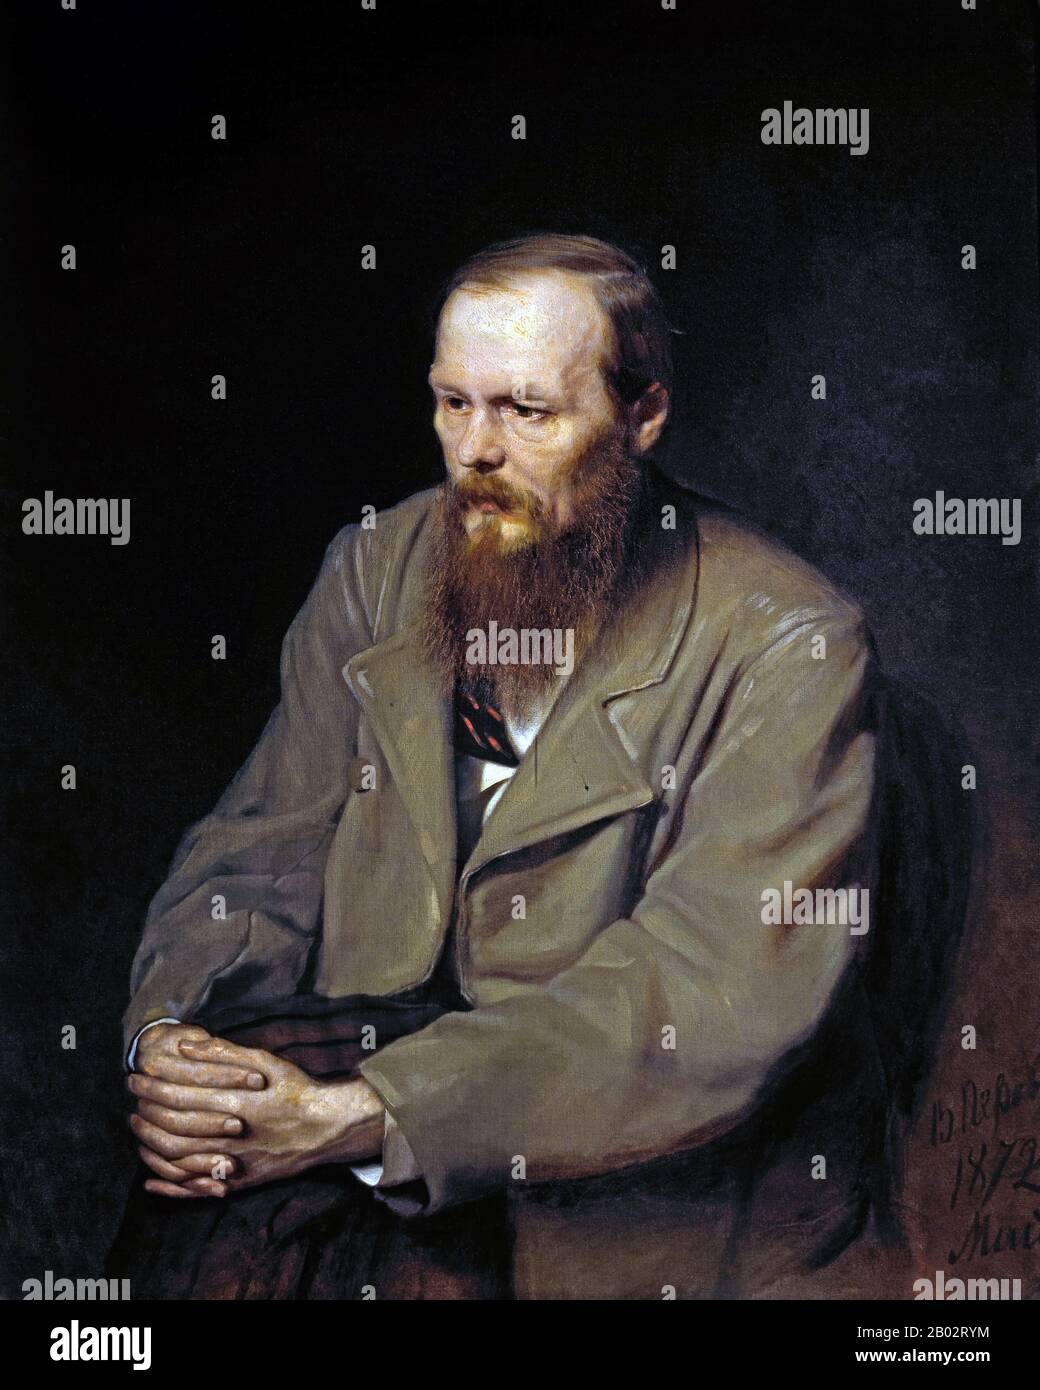 Dostoevsky was a Russian novelist, short story writer, essayist, journalist and philosopher. Dostoyevsky's literary works explore human psychology in the troubled political, social, and spiritual atmosphere of 19th-century Russia. Many of his works contain a strong emphasis on Christianity, and its message of absolute love, forgiveness and charity, explored within the realm of the individual, confronted with all of life's hardships and beauty.  He began writing in his 20s, and his first novel, Poor Folk, was published in 1846 when he was 25. His major works include Crime and Punishment (1866), Stock Photo